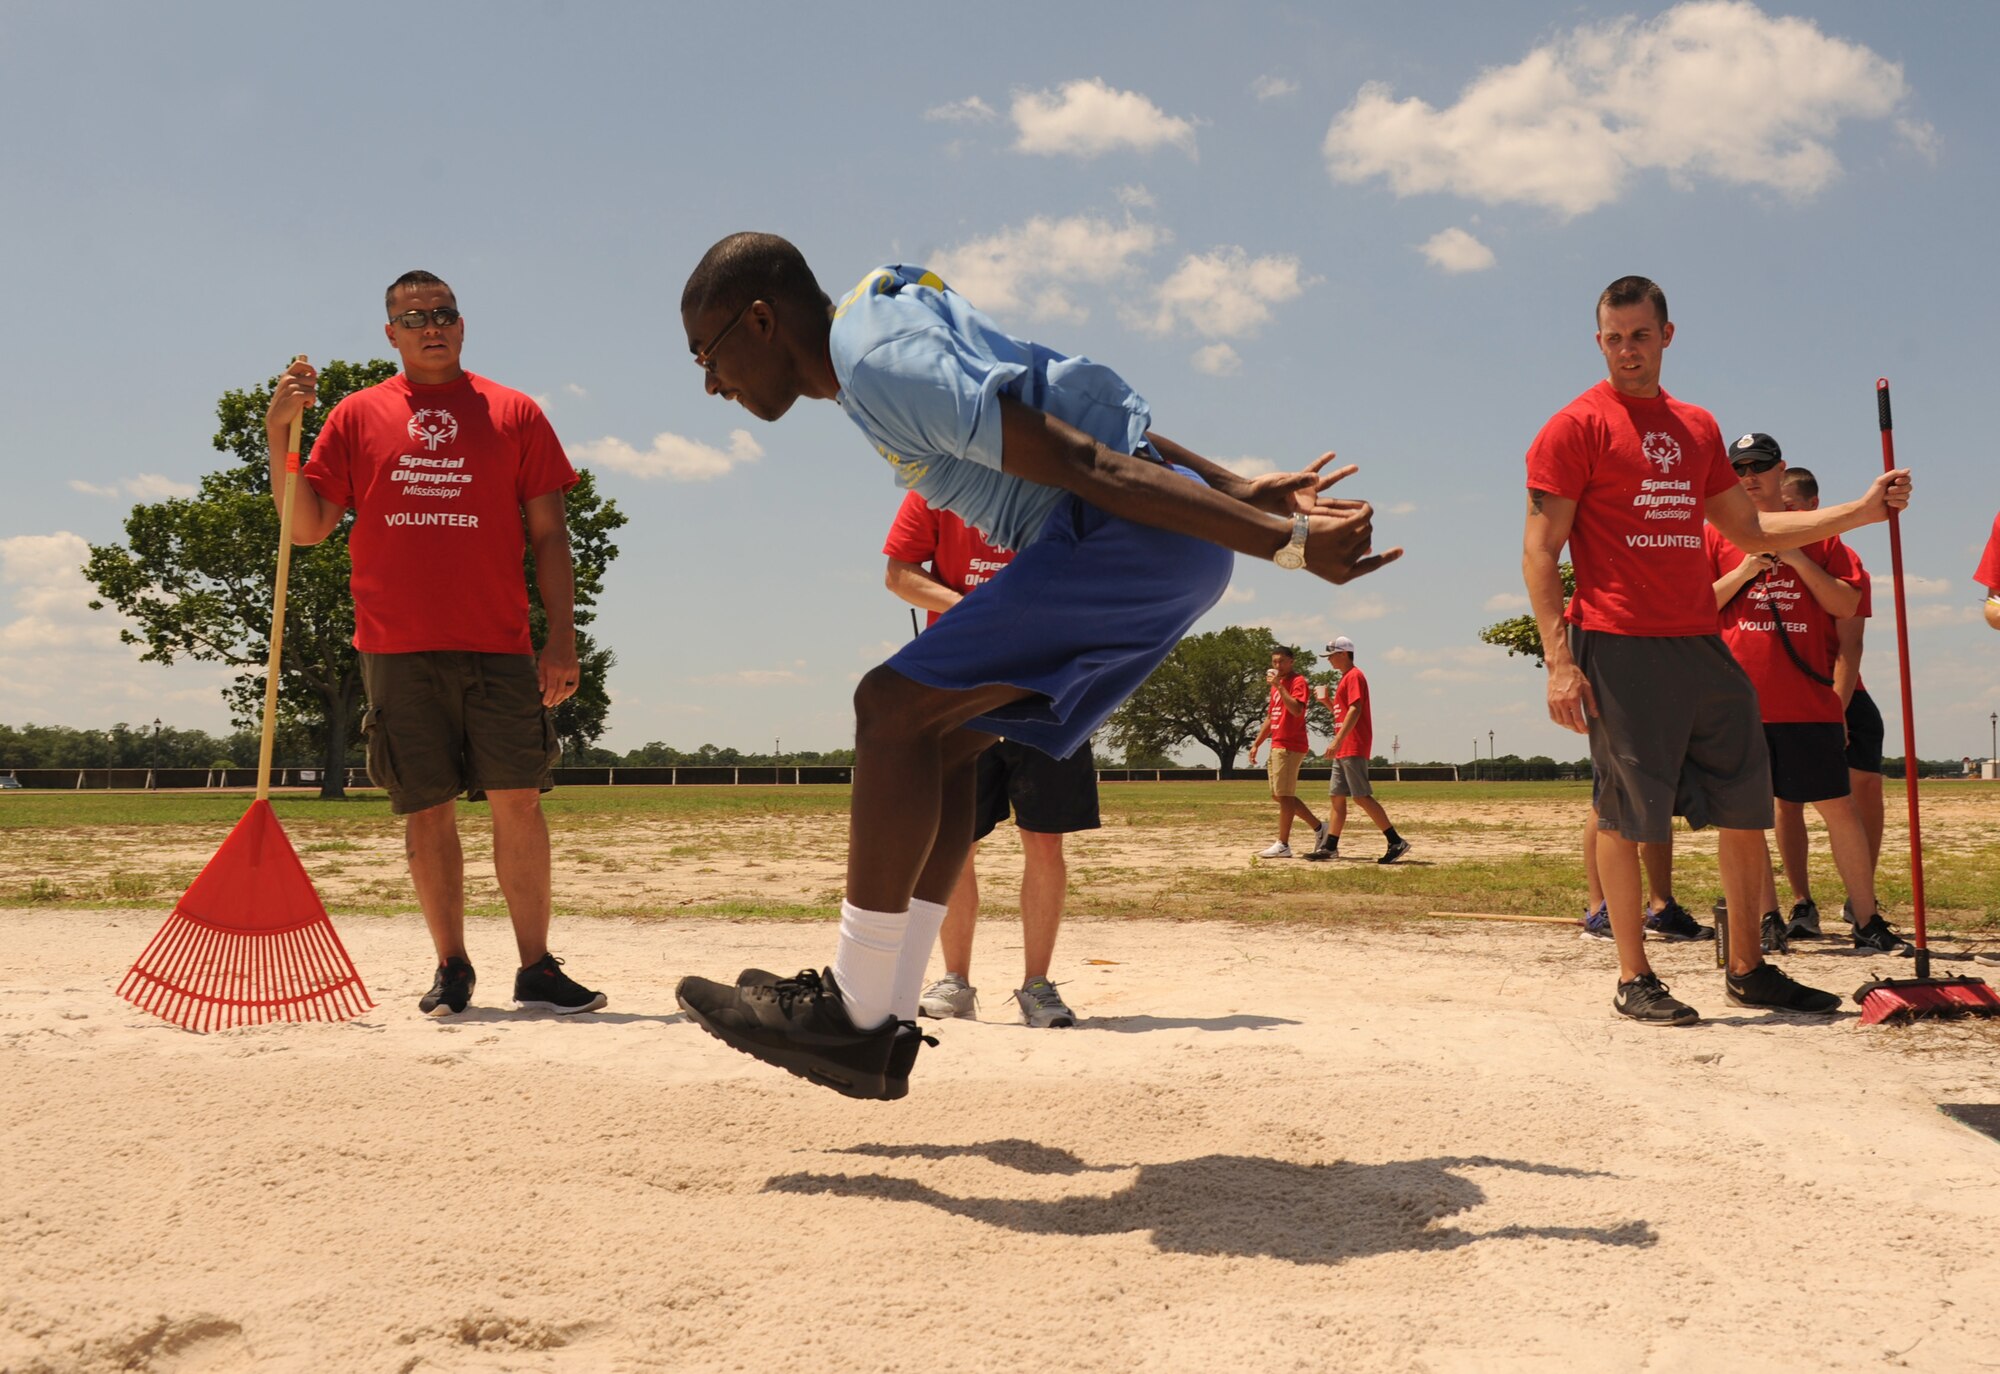 Mike Brown, Special Olympics athlete, participates in the standing long jump competition during the Special Olympics Mississippi Summer Games at the triangle track May 21, 2016, Keesler Air Force Base, Miss. More than 700 athletes and 3,000 volunteers worked together to hold competitions throughout the day. This is the 30th year Keesler has hosted the state Special Olympics.  (U.S. Air Force photo by Kemberly Groue)